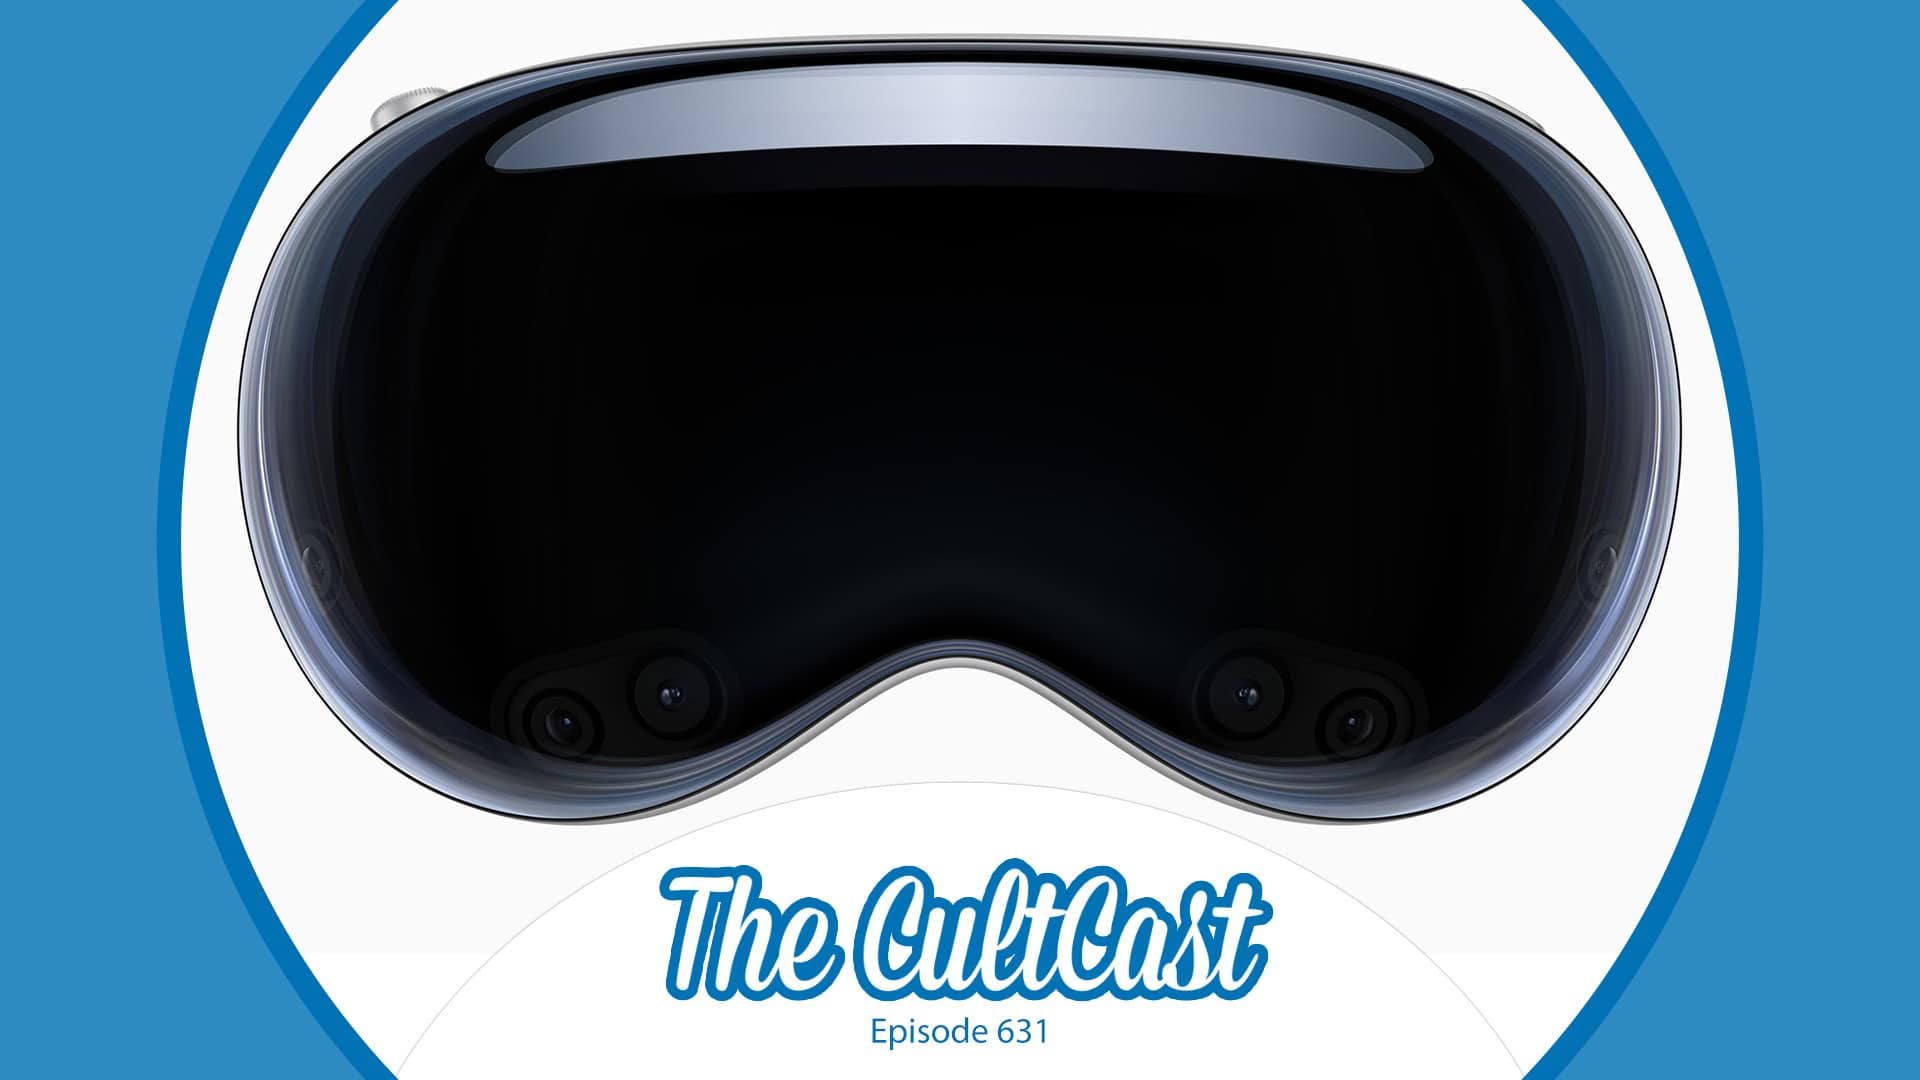 CultCast Vision Pro preorders